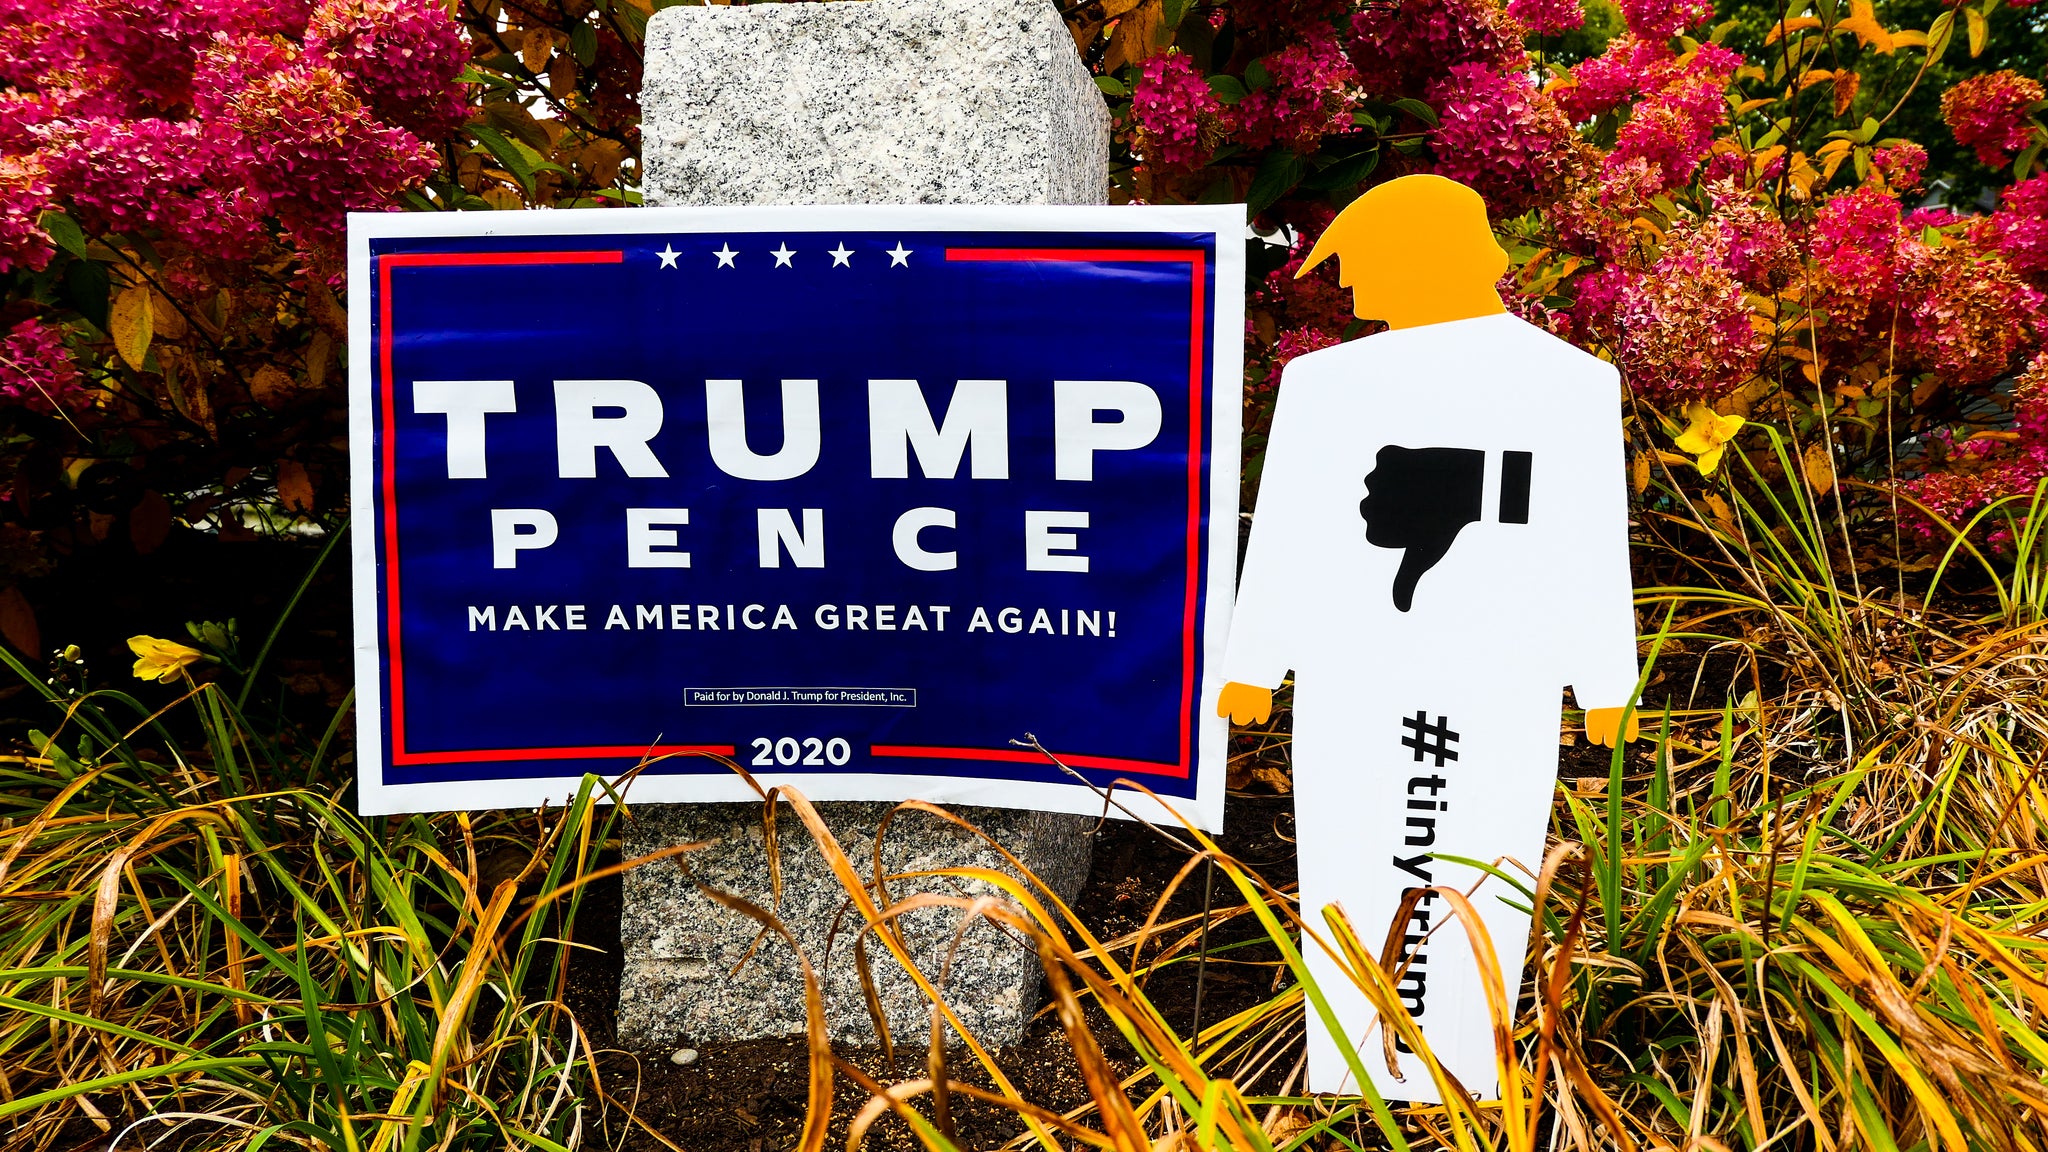 two foot tall tiny trump lawn sign (white coroplast trump cutout with orange head and hands) with a thumbs down sign in the chest standing next to a large trump/pence sign in a floral garden